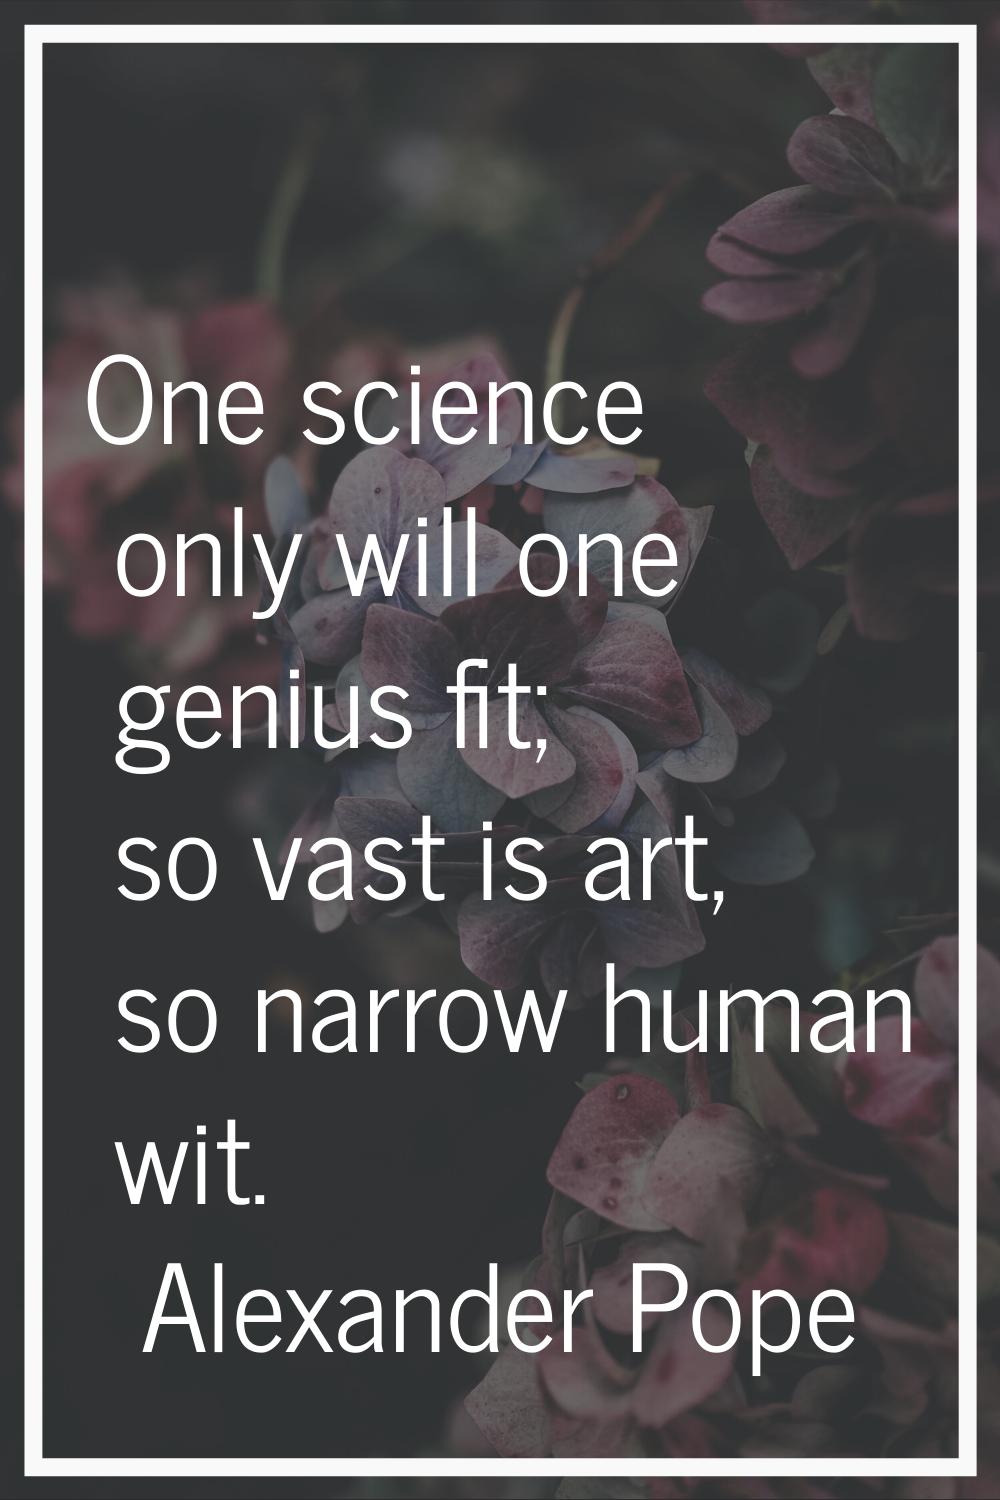 One science only will one genius fit; so vast is art, so narrow human wit.